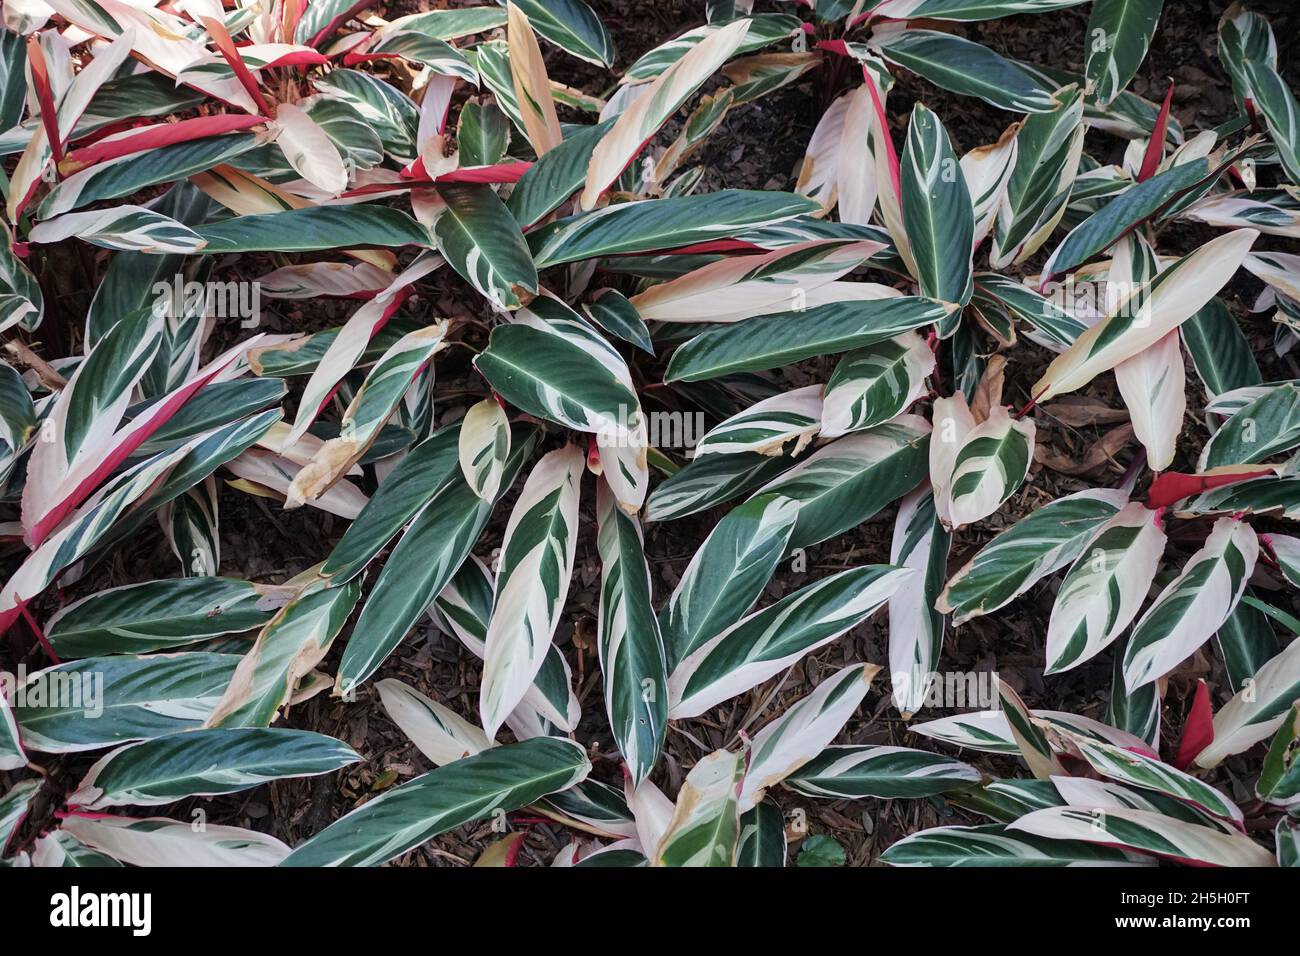 The white and green leaves of Stromanthe Sanguinea Triostar, a tropical plant Stock Photo